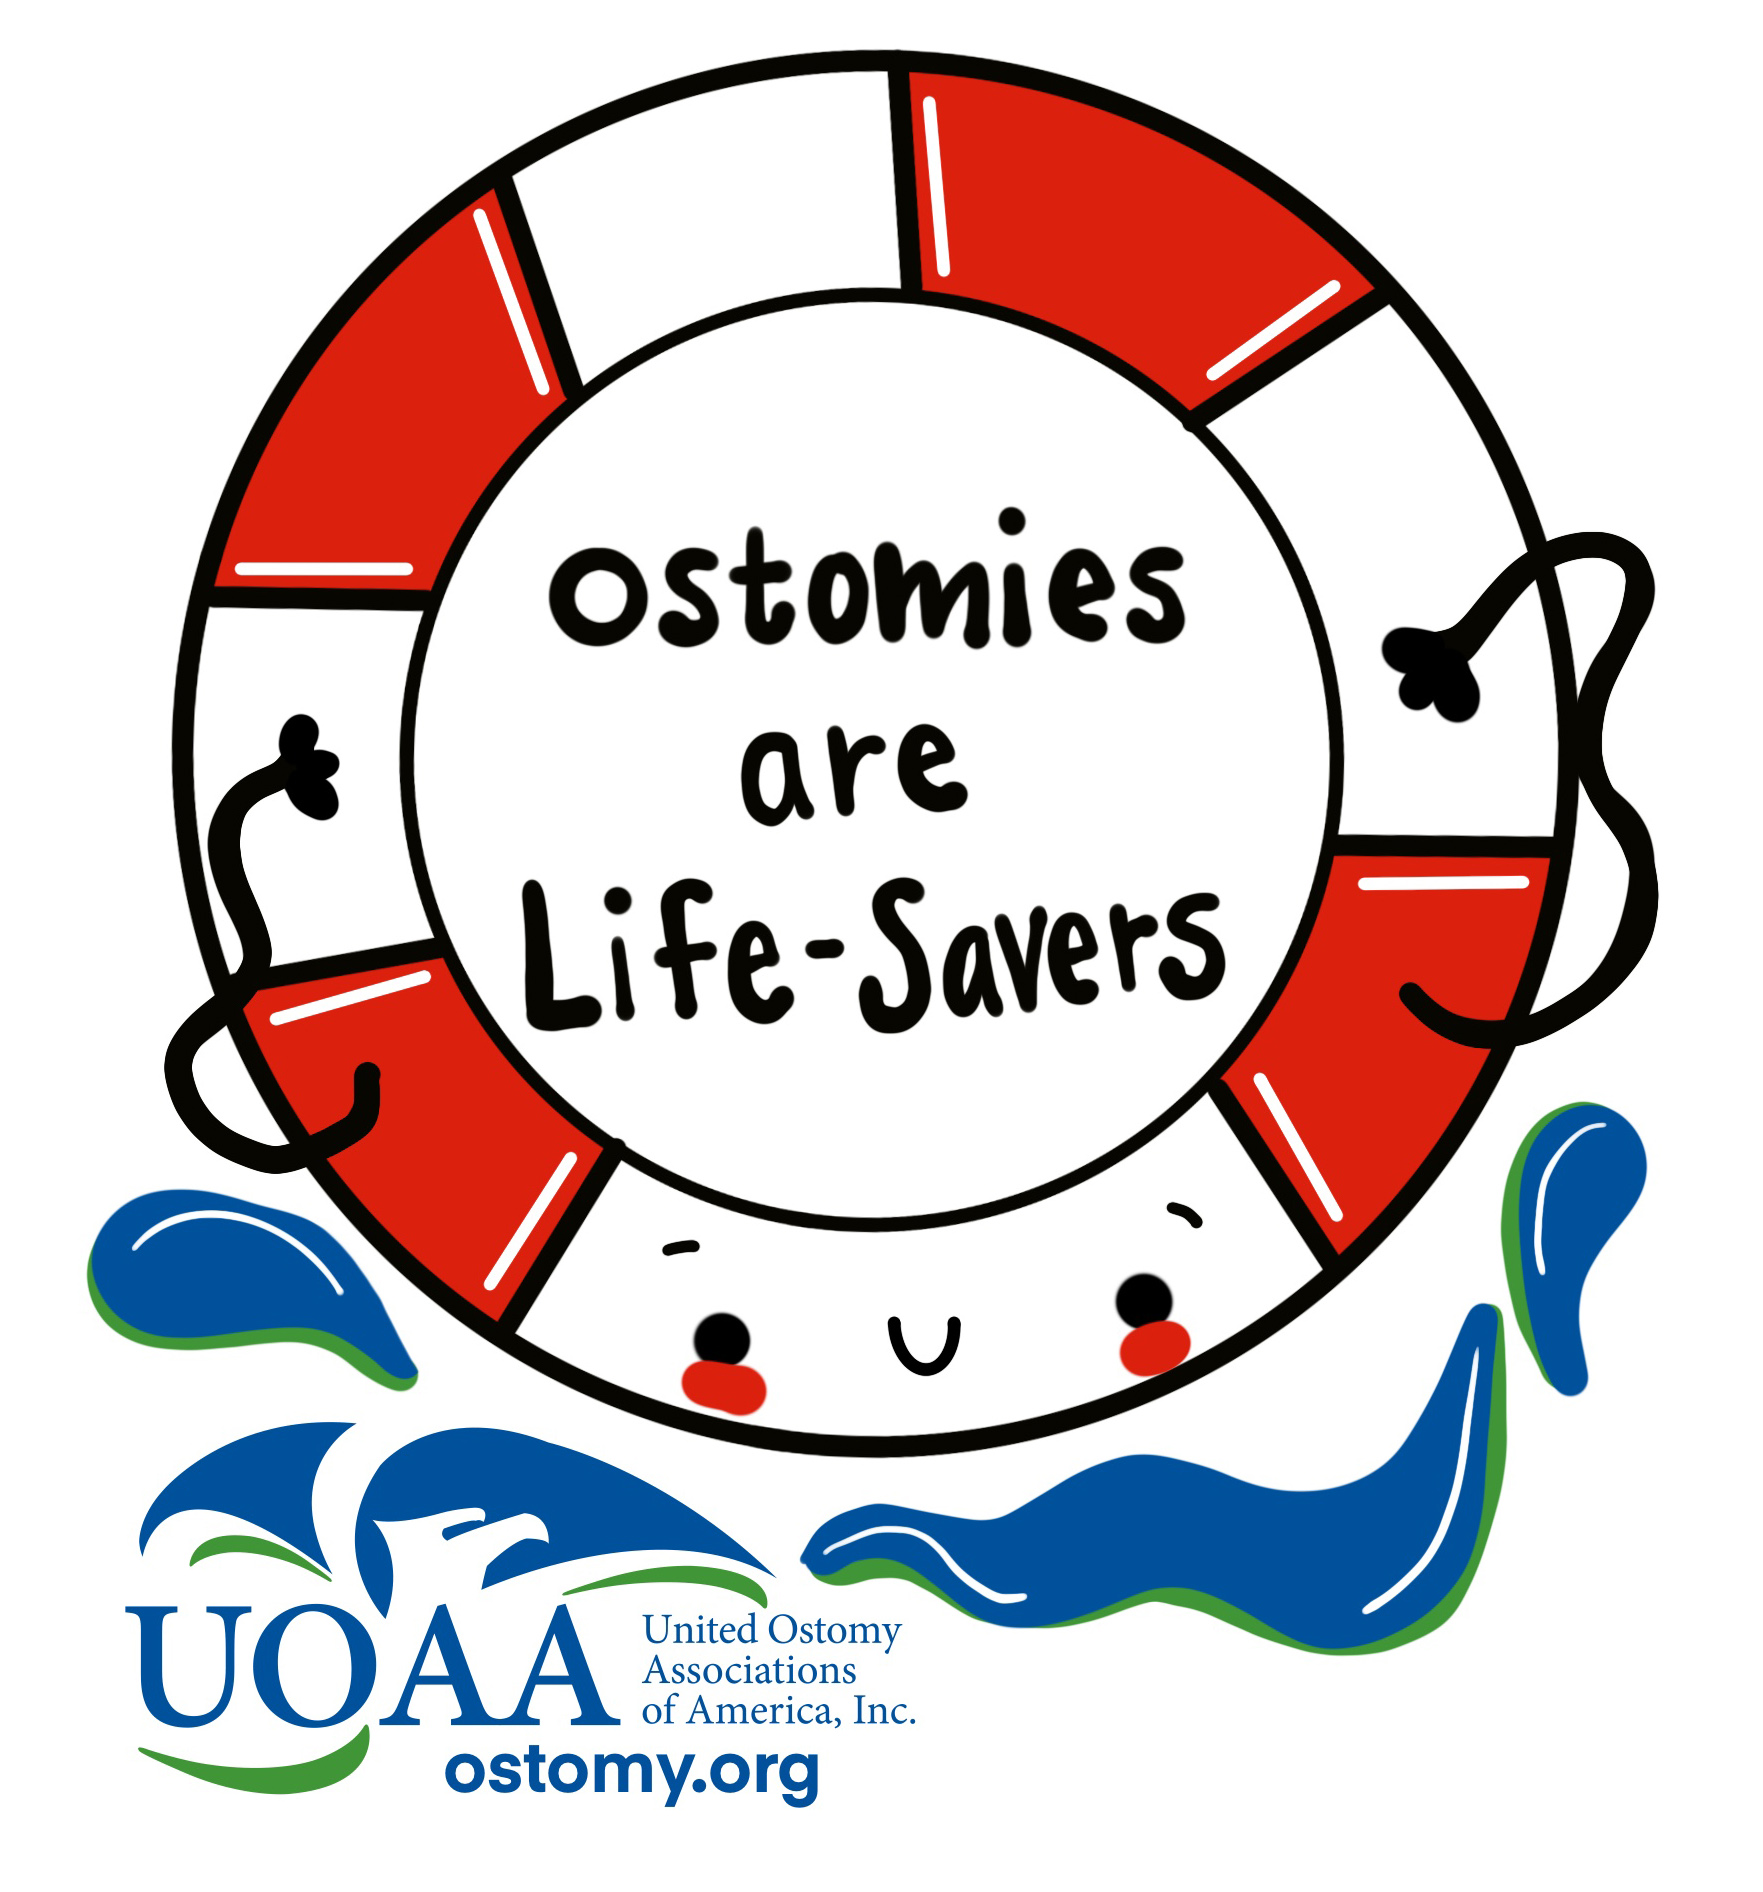 United Ostomy Associations of America (UOAA) is sharing the message that Ostomies are Lifesavers during Ostomy Awareness day on October 1, 2022.